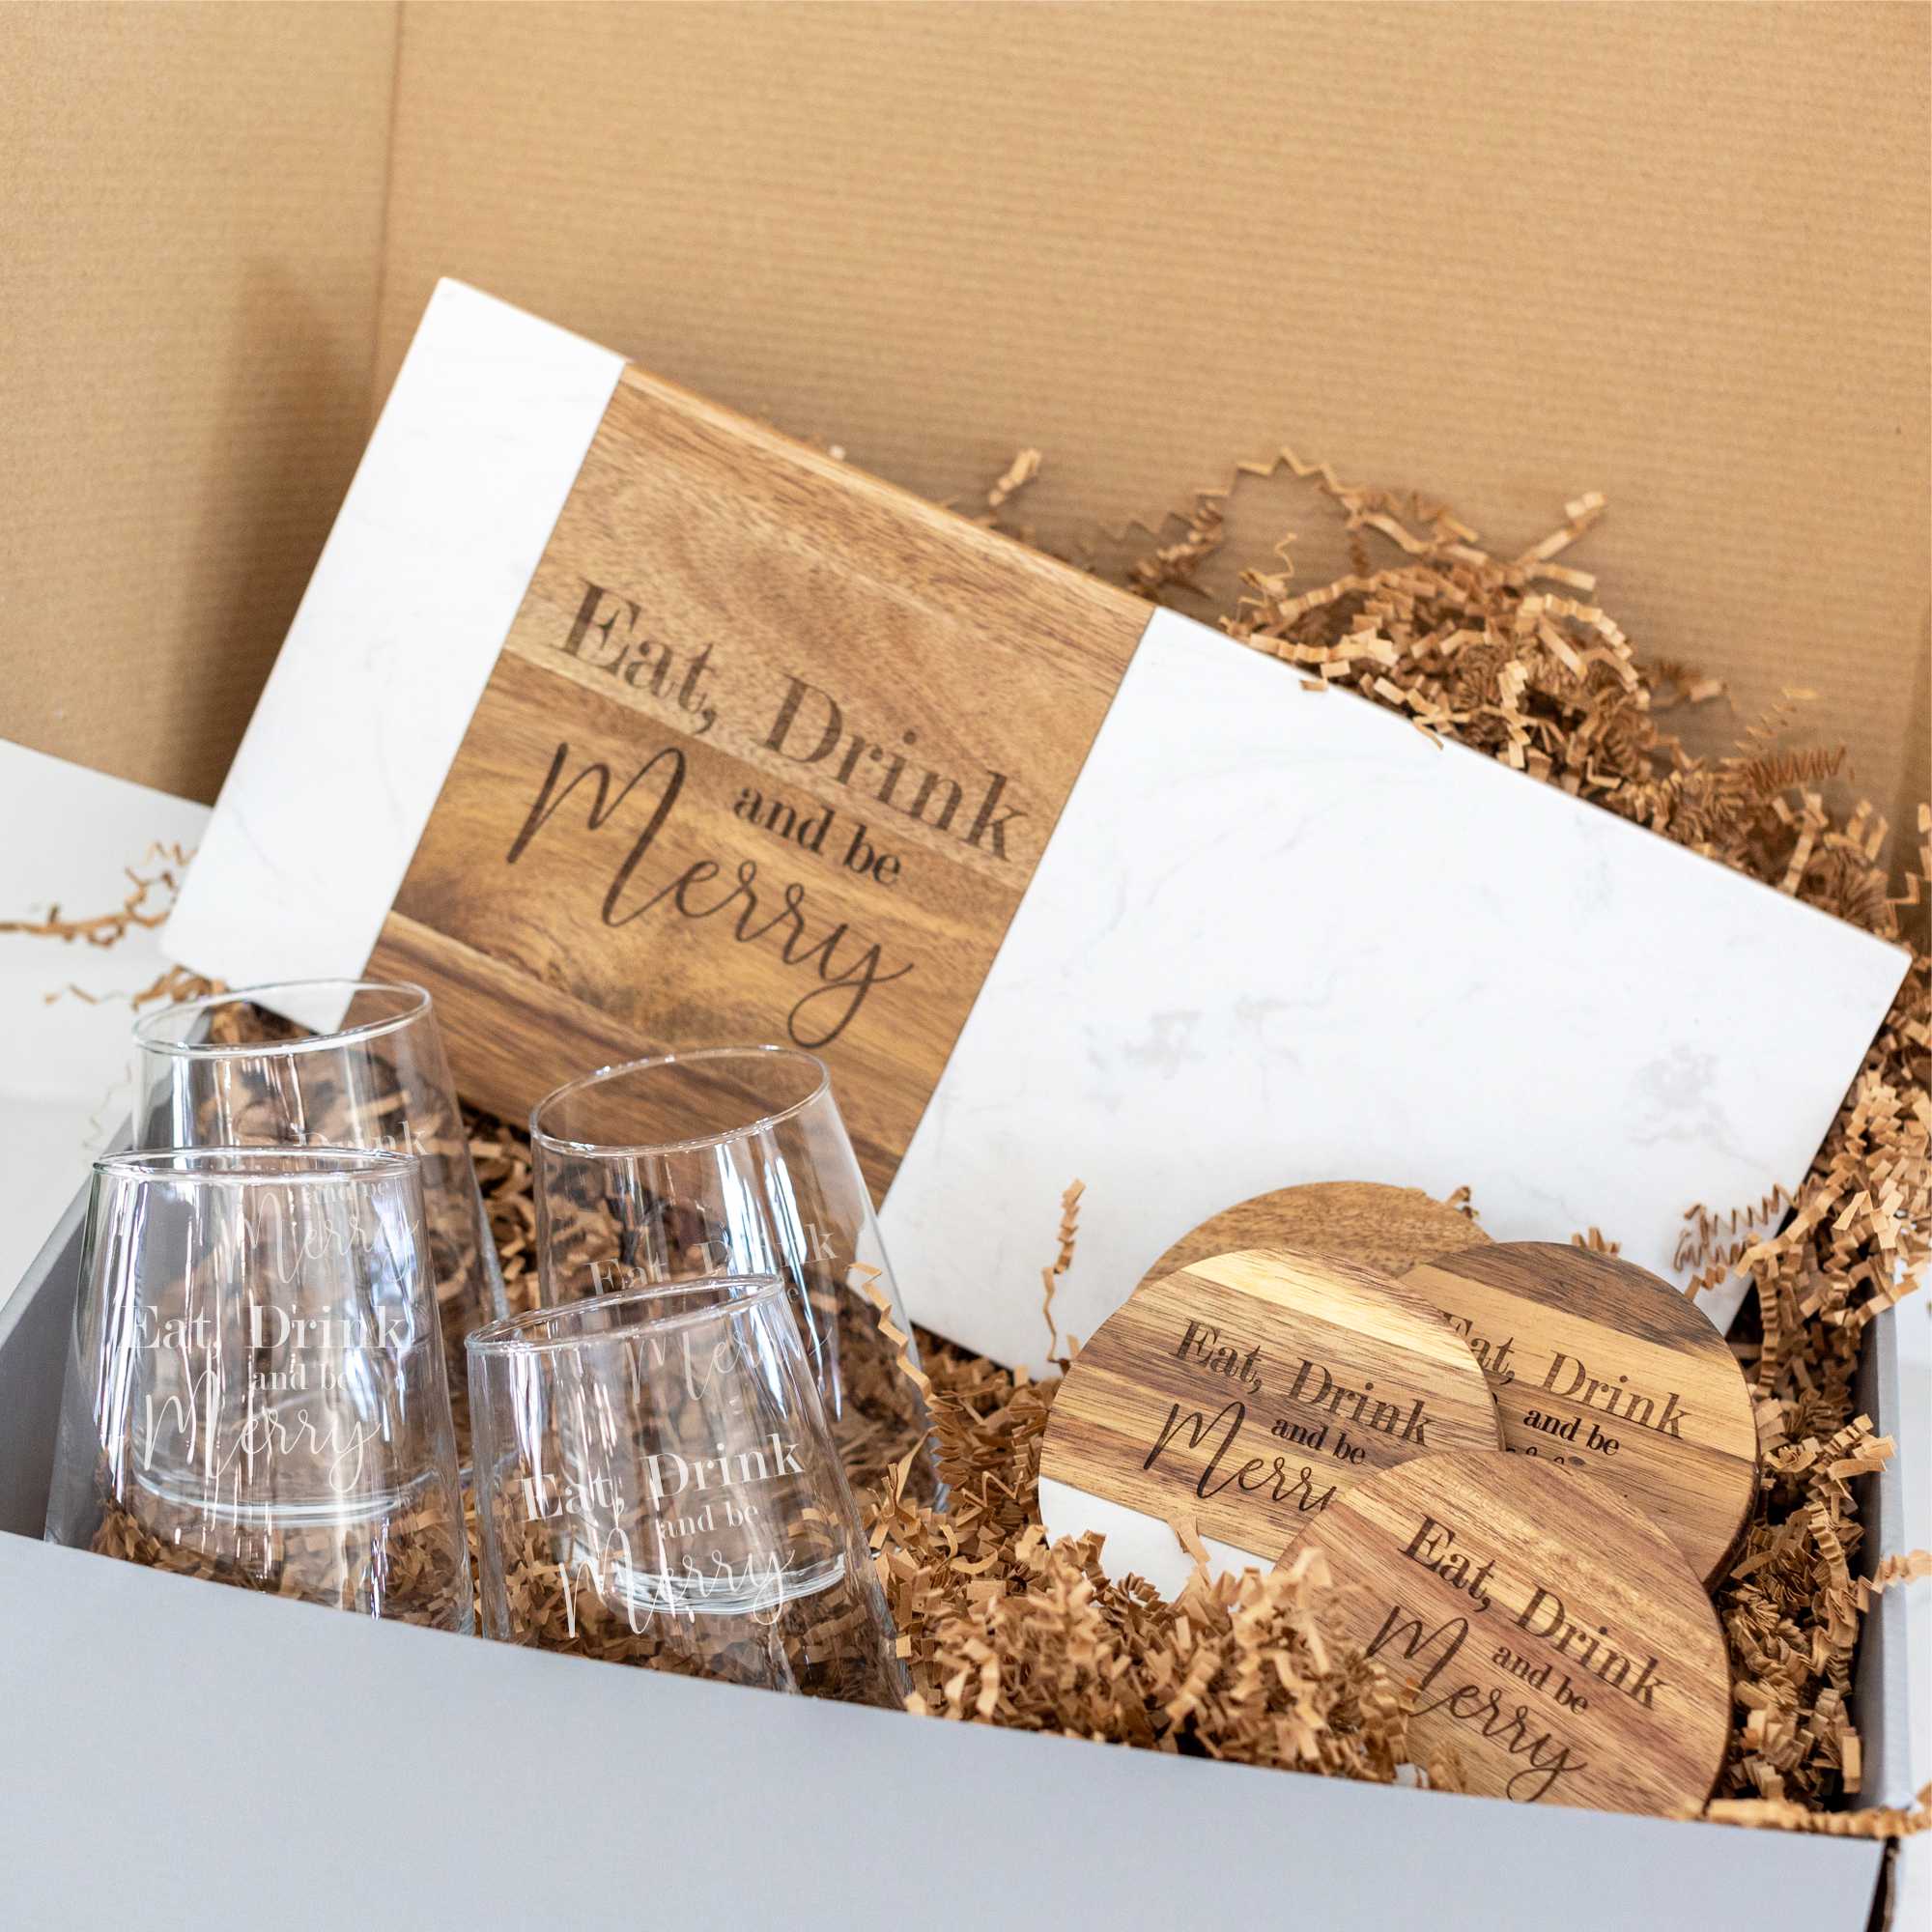 Eat, Drink, and be Merry - 9pc Gift Box